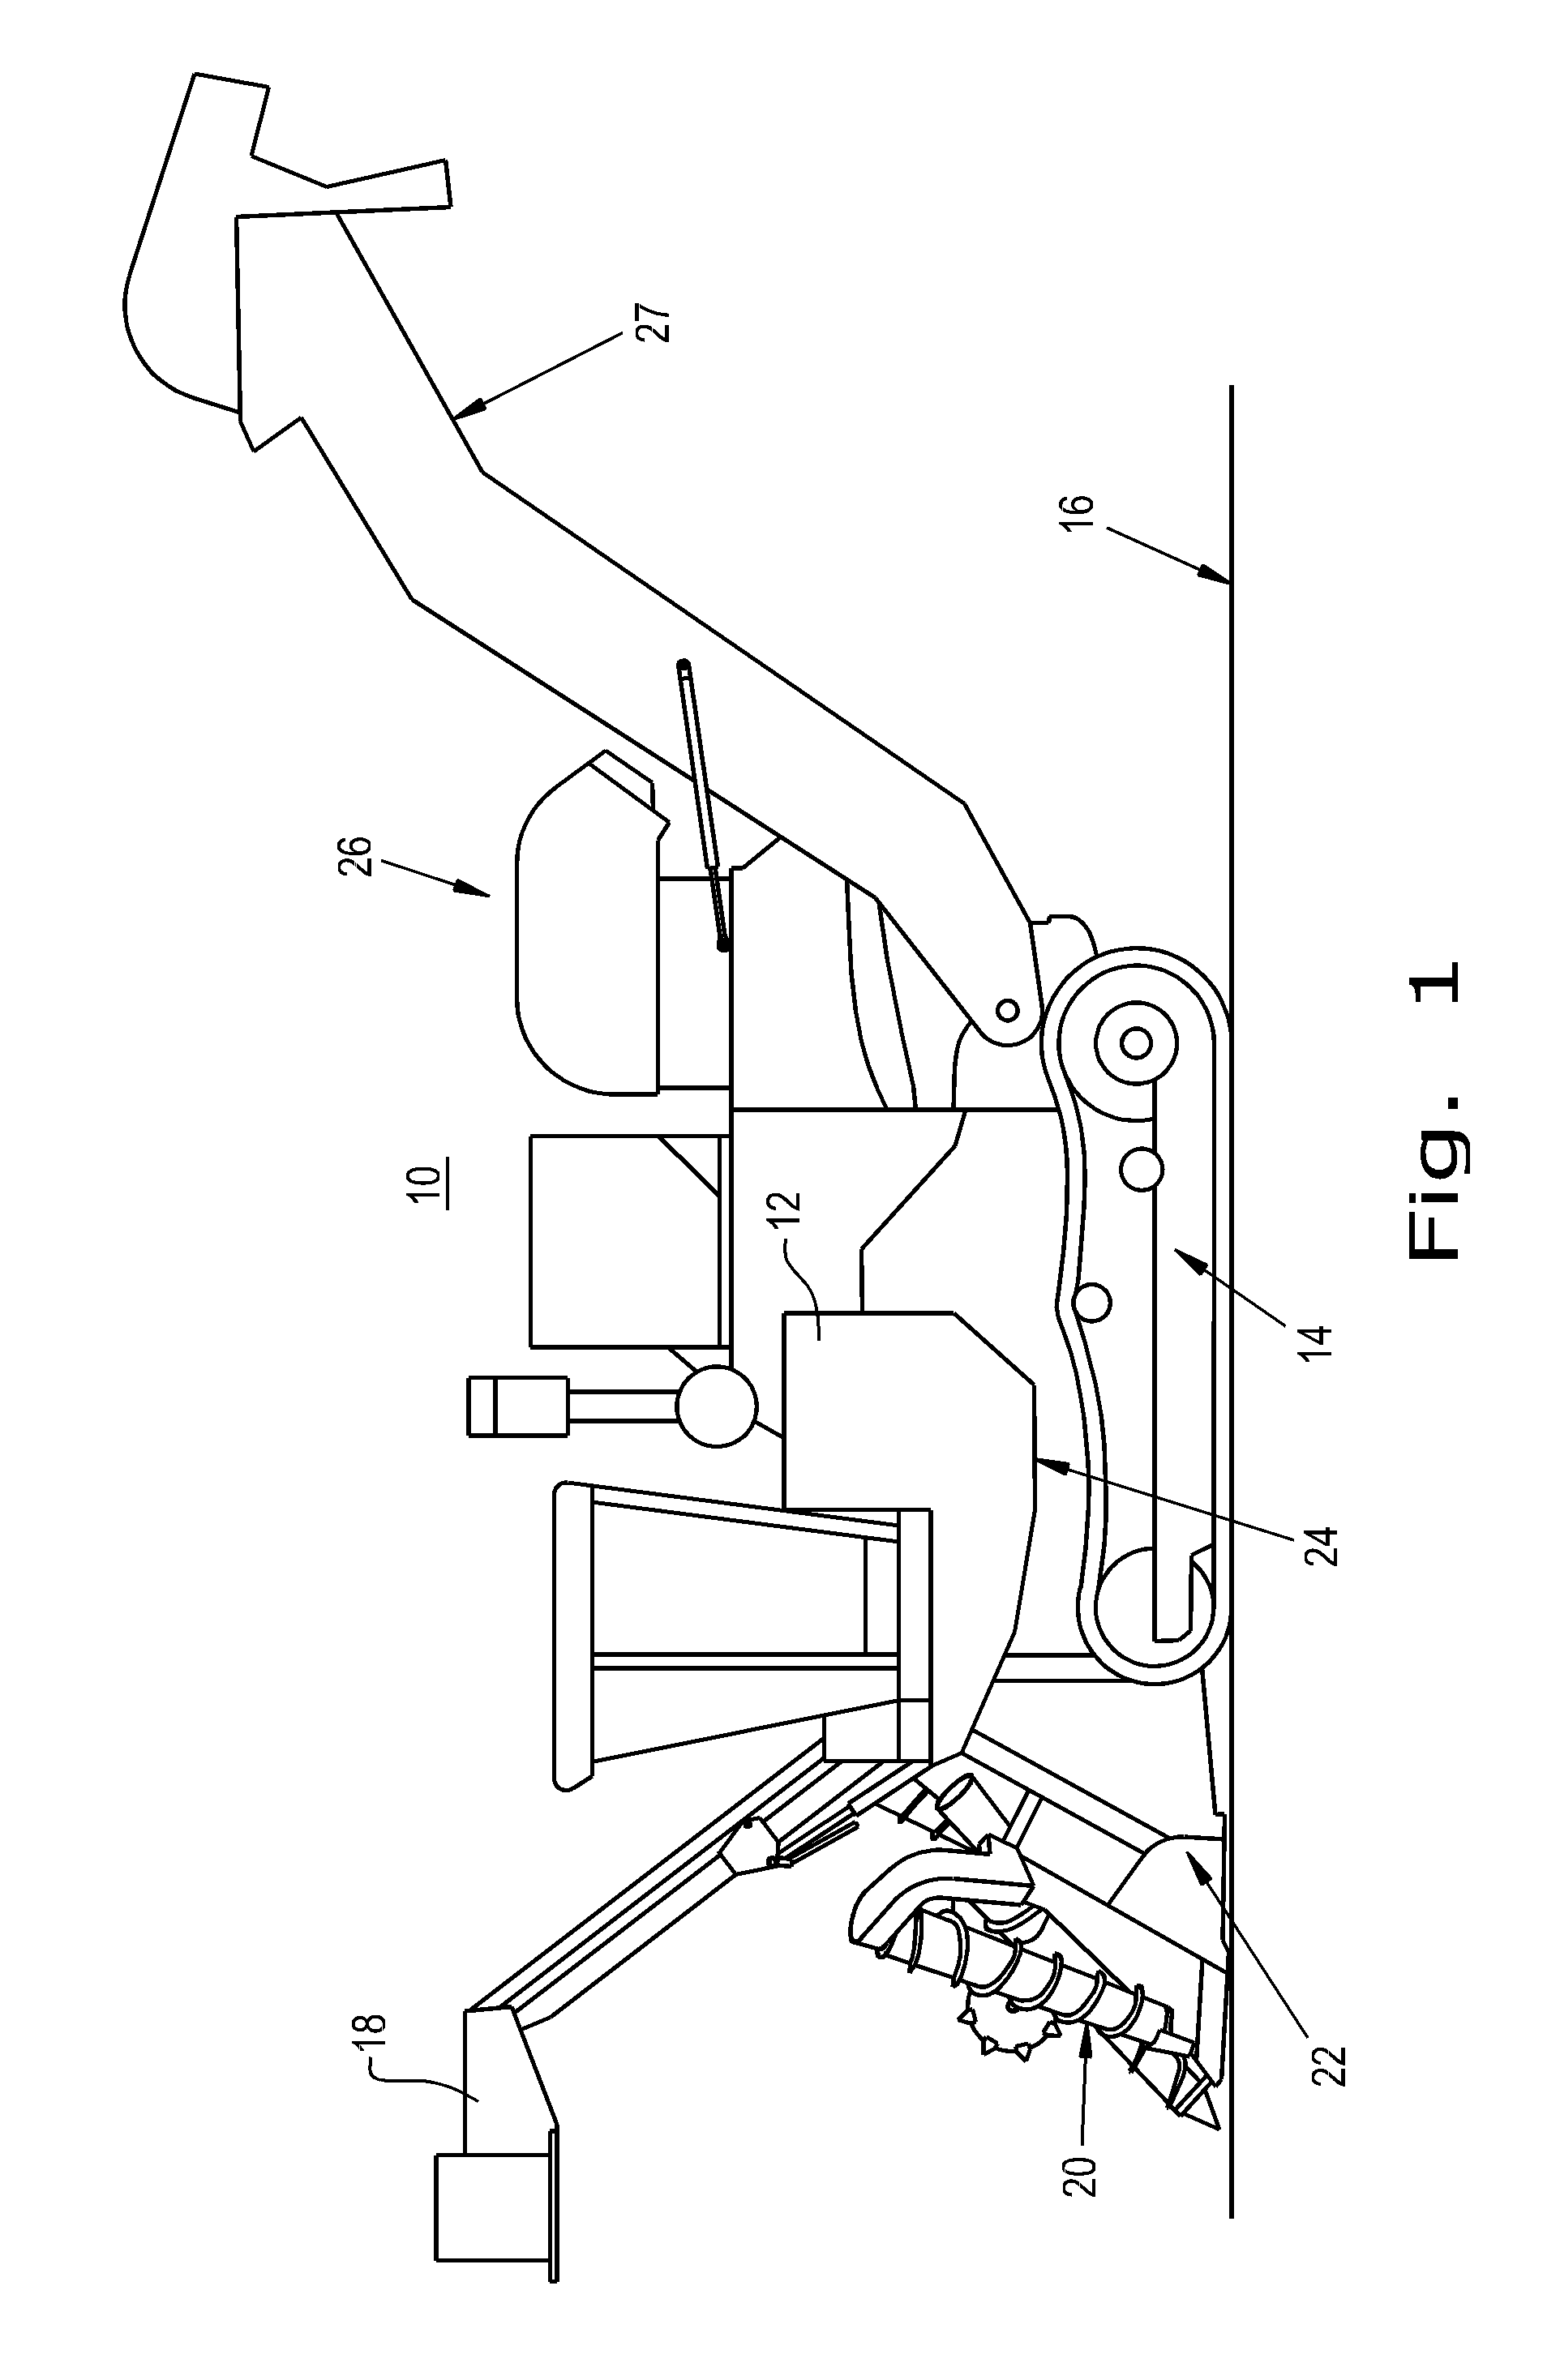 Method and Apparatus for Control of Base Cutter Height for Multiple Row Sugar Cane Harvesters